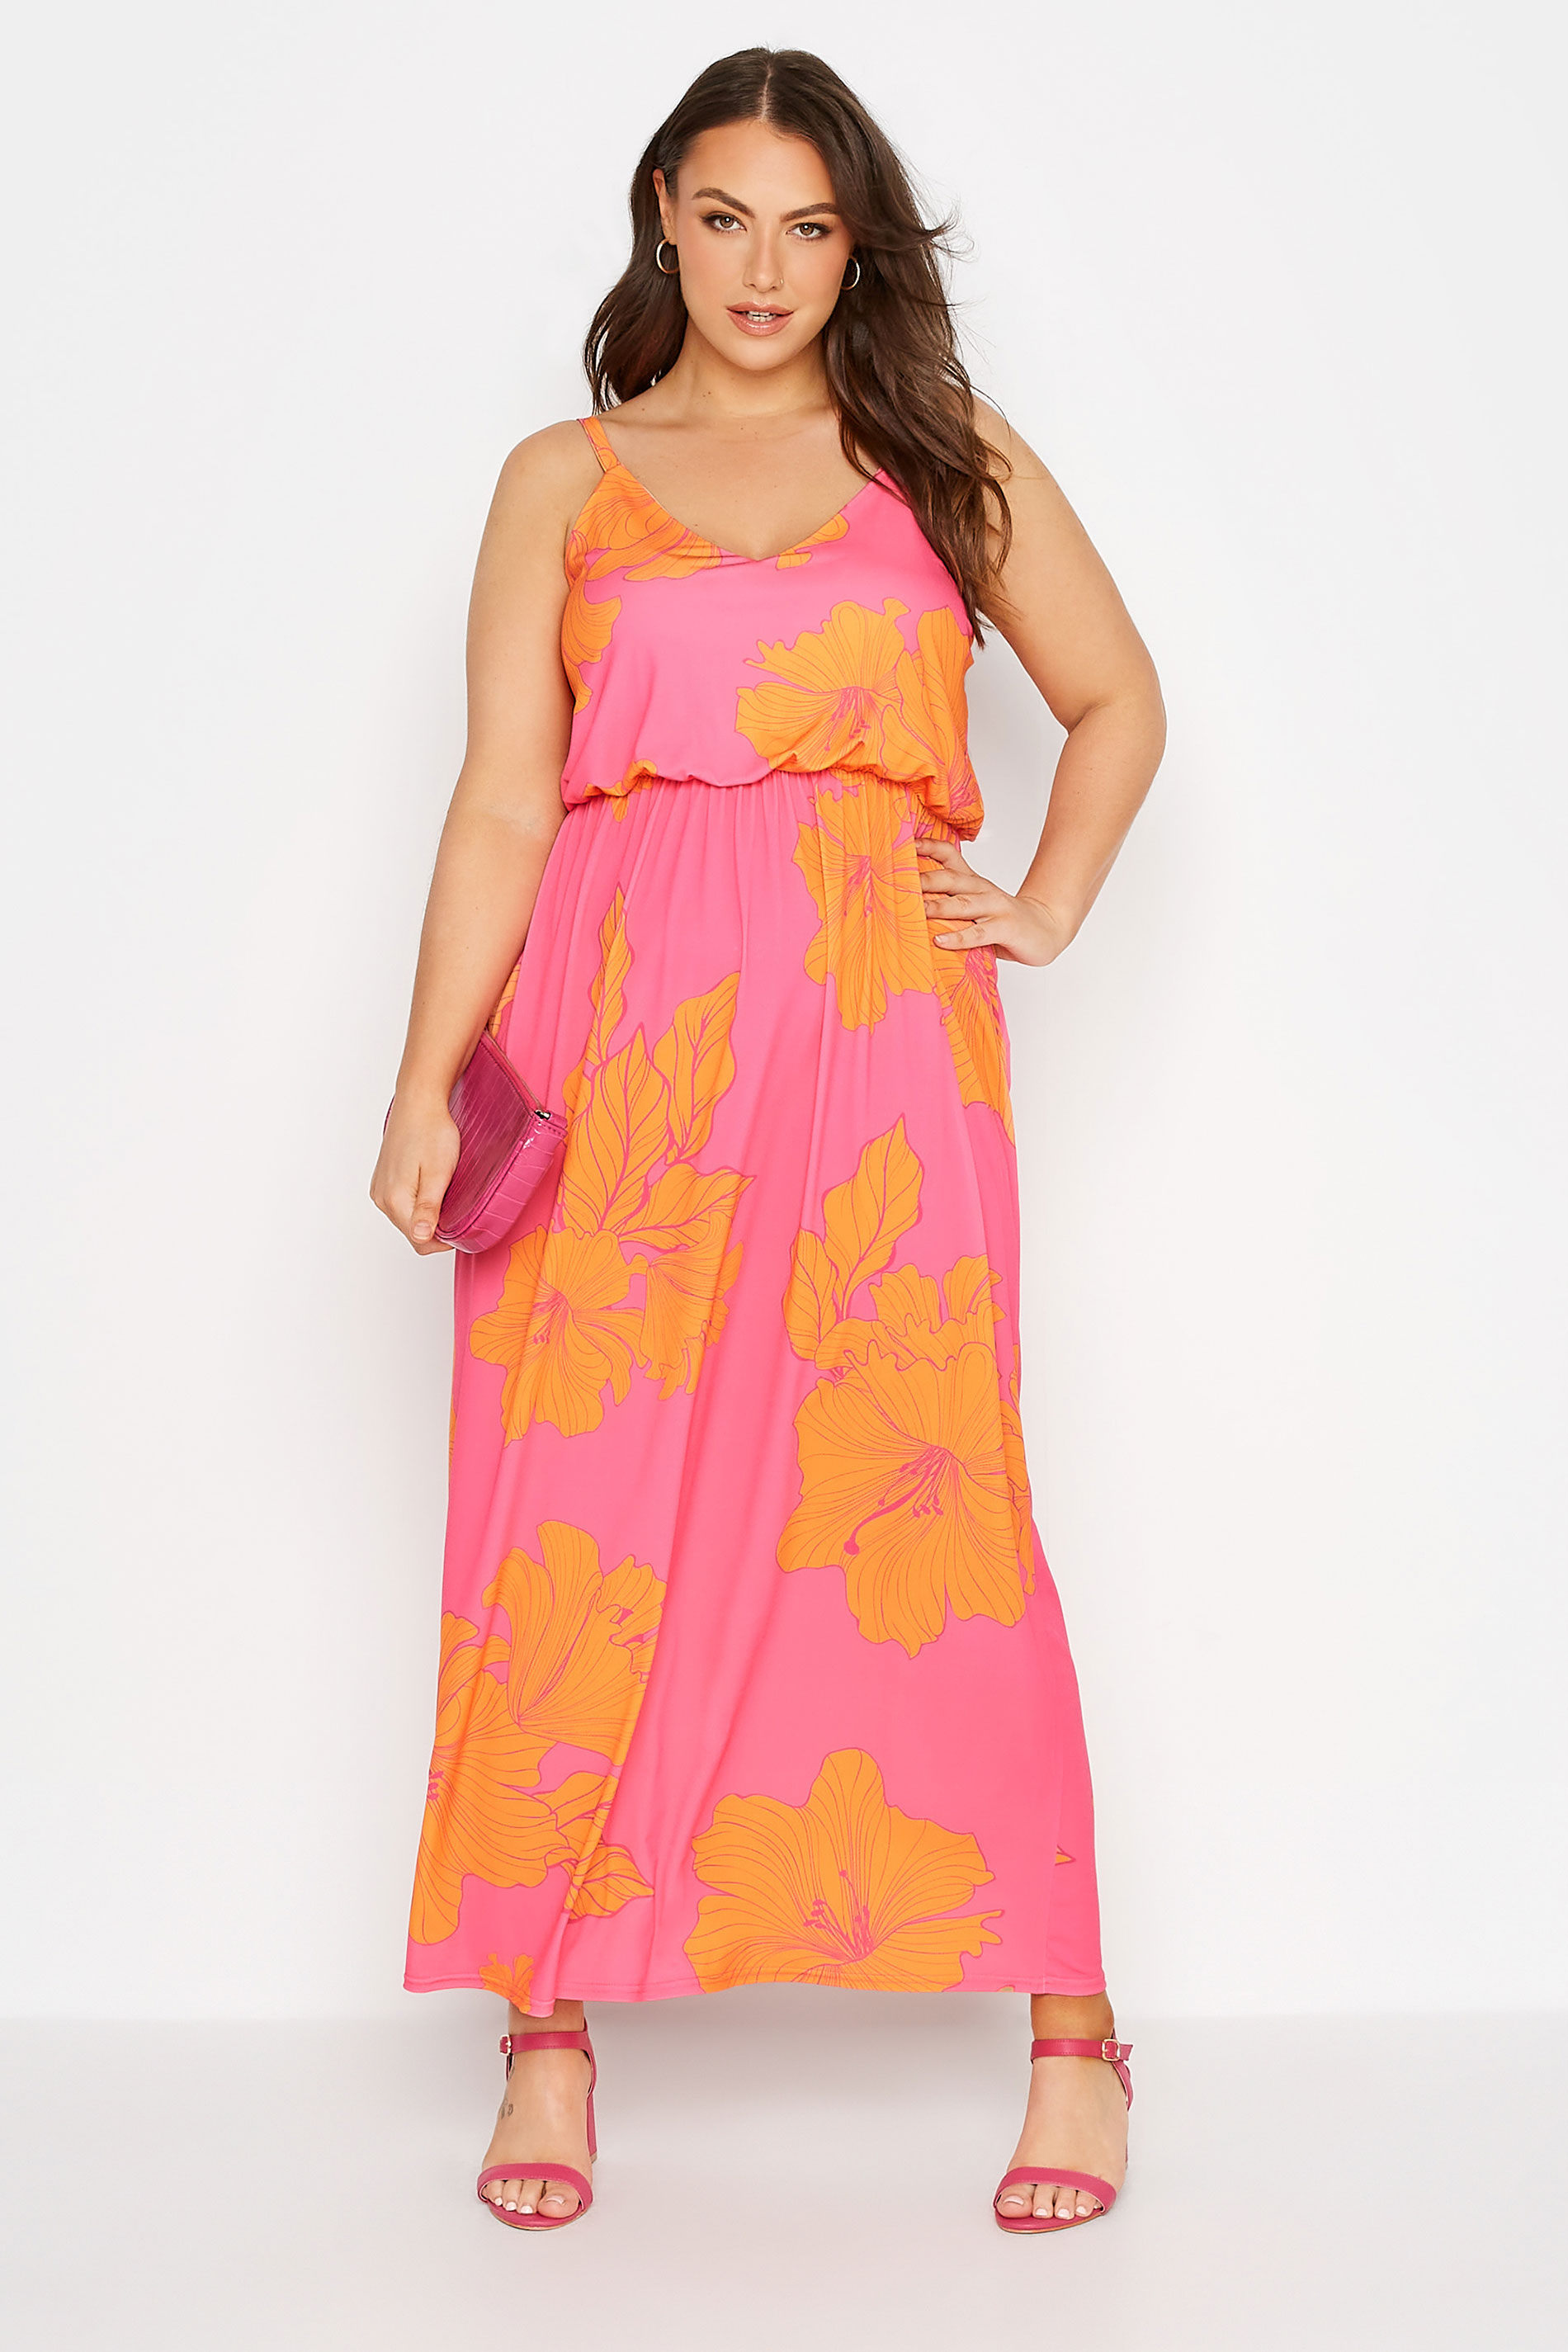 Robes Grande Taille Grande taille  Robes Longues | YOURS LONDON - Robe Rose Imprimé Floral Tropical Orange - TY31406